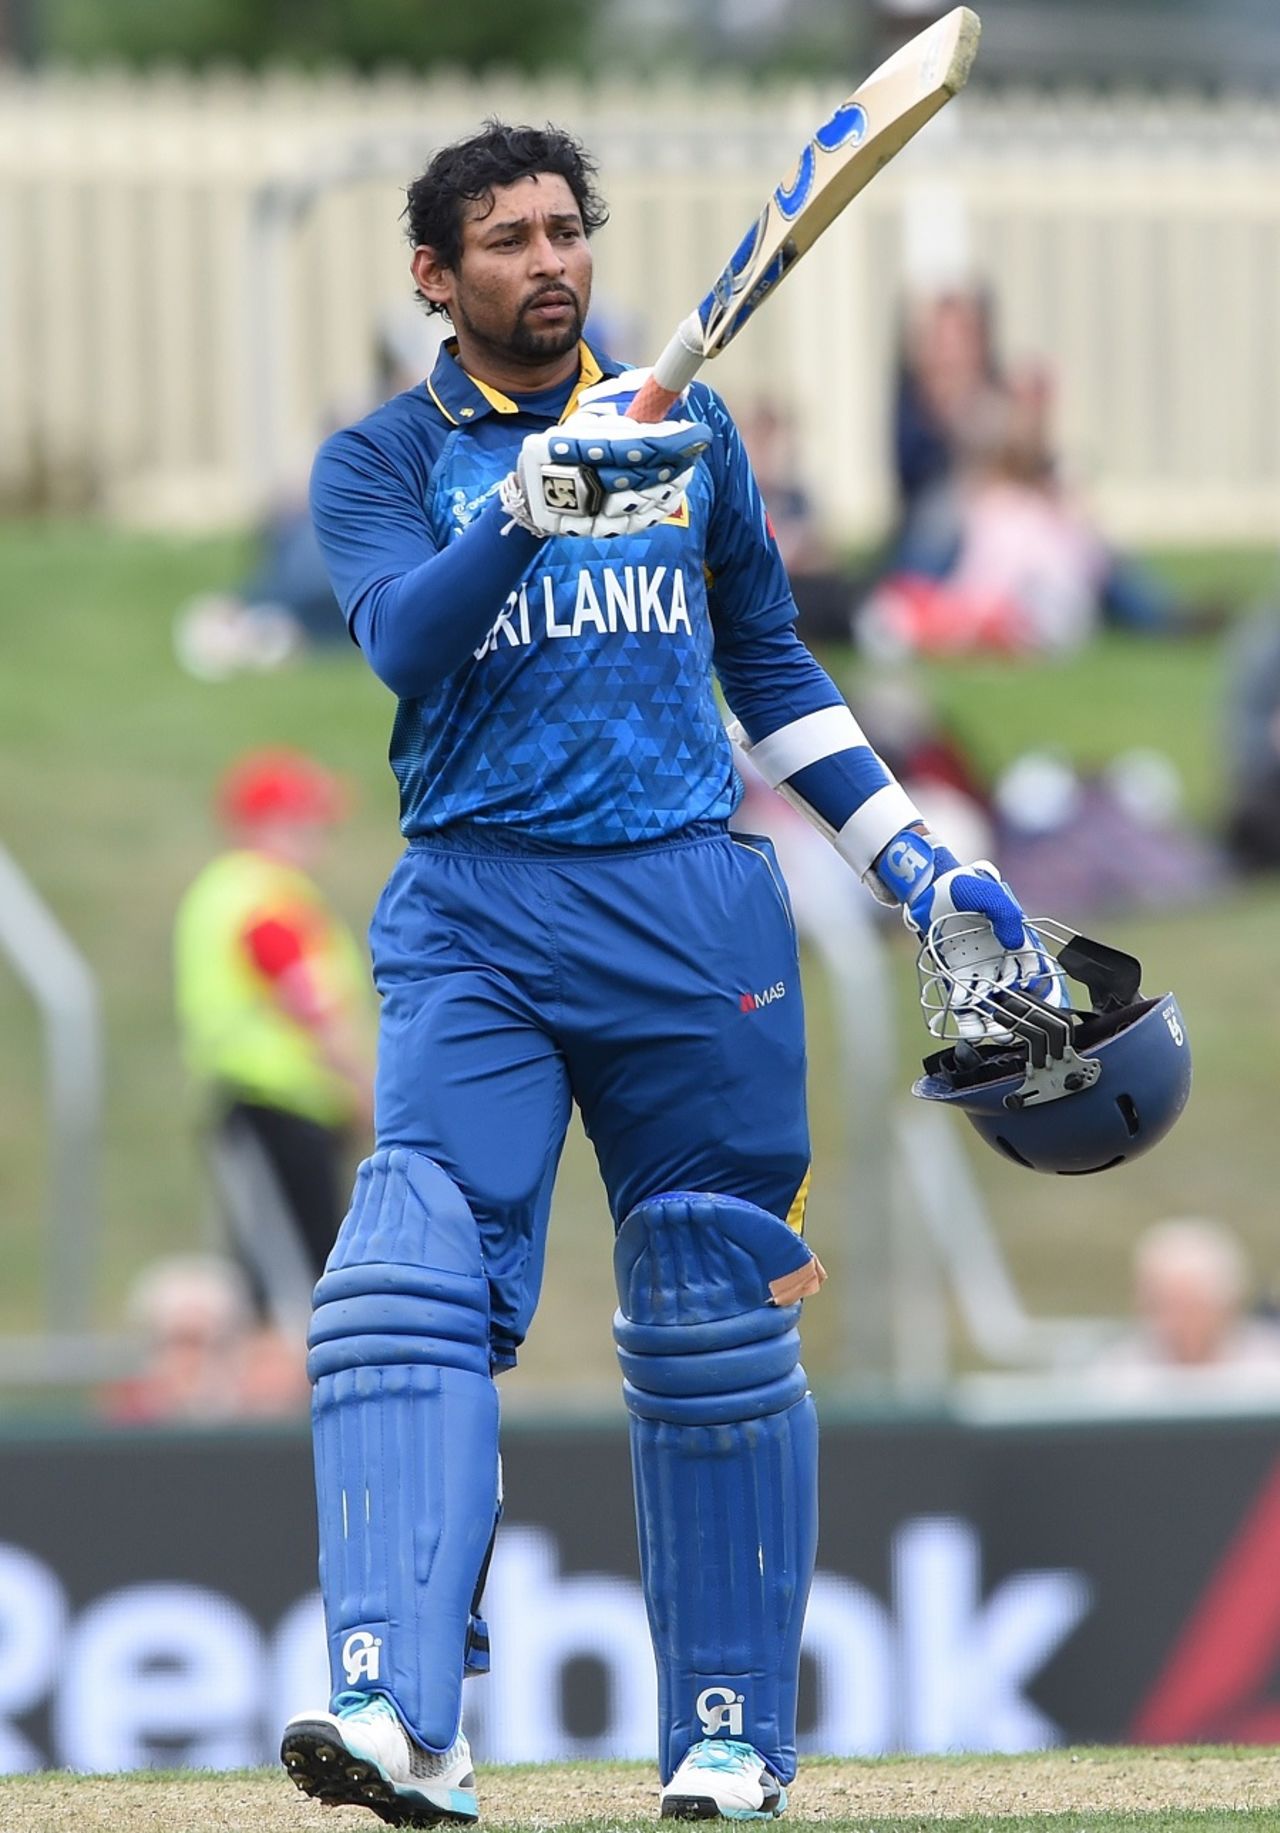 Tillakaratne Dilshan acknowledges the crowd's cheers after scoring his century, Scotland v Sri Lanka, World Cup 2015, Group A, Hobart, March 11, 2015